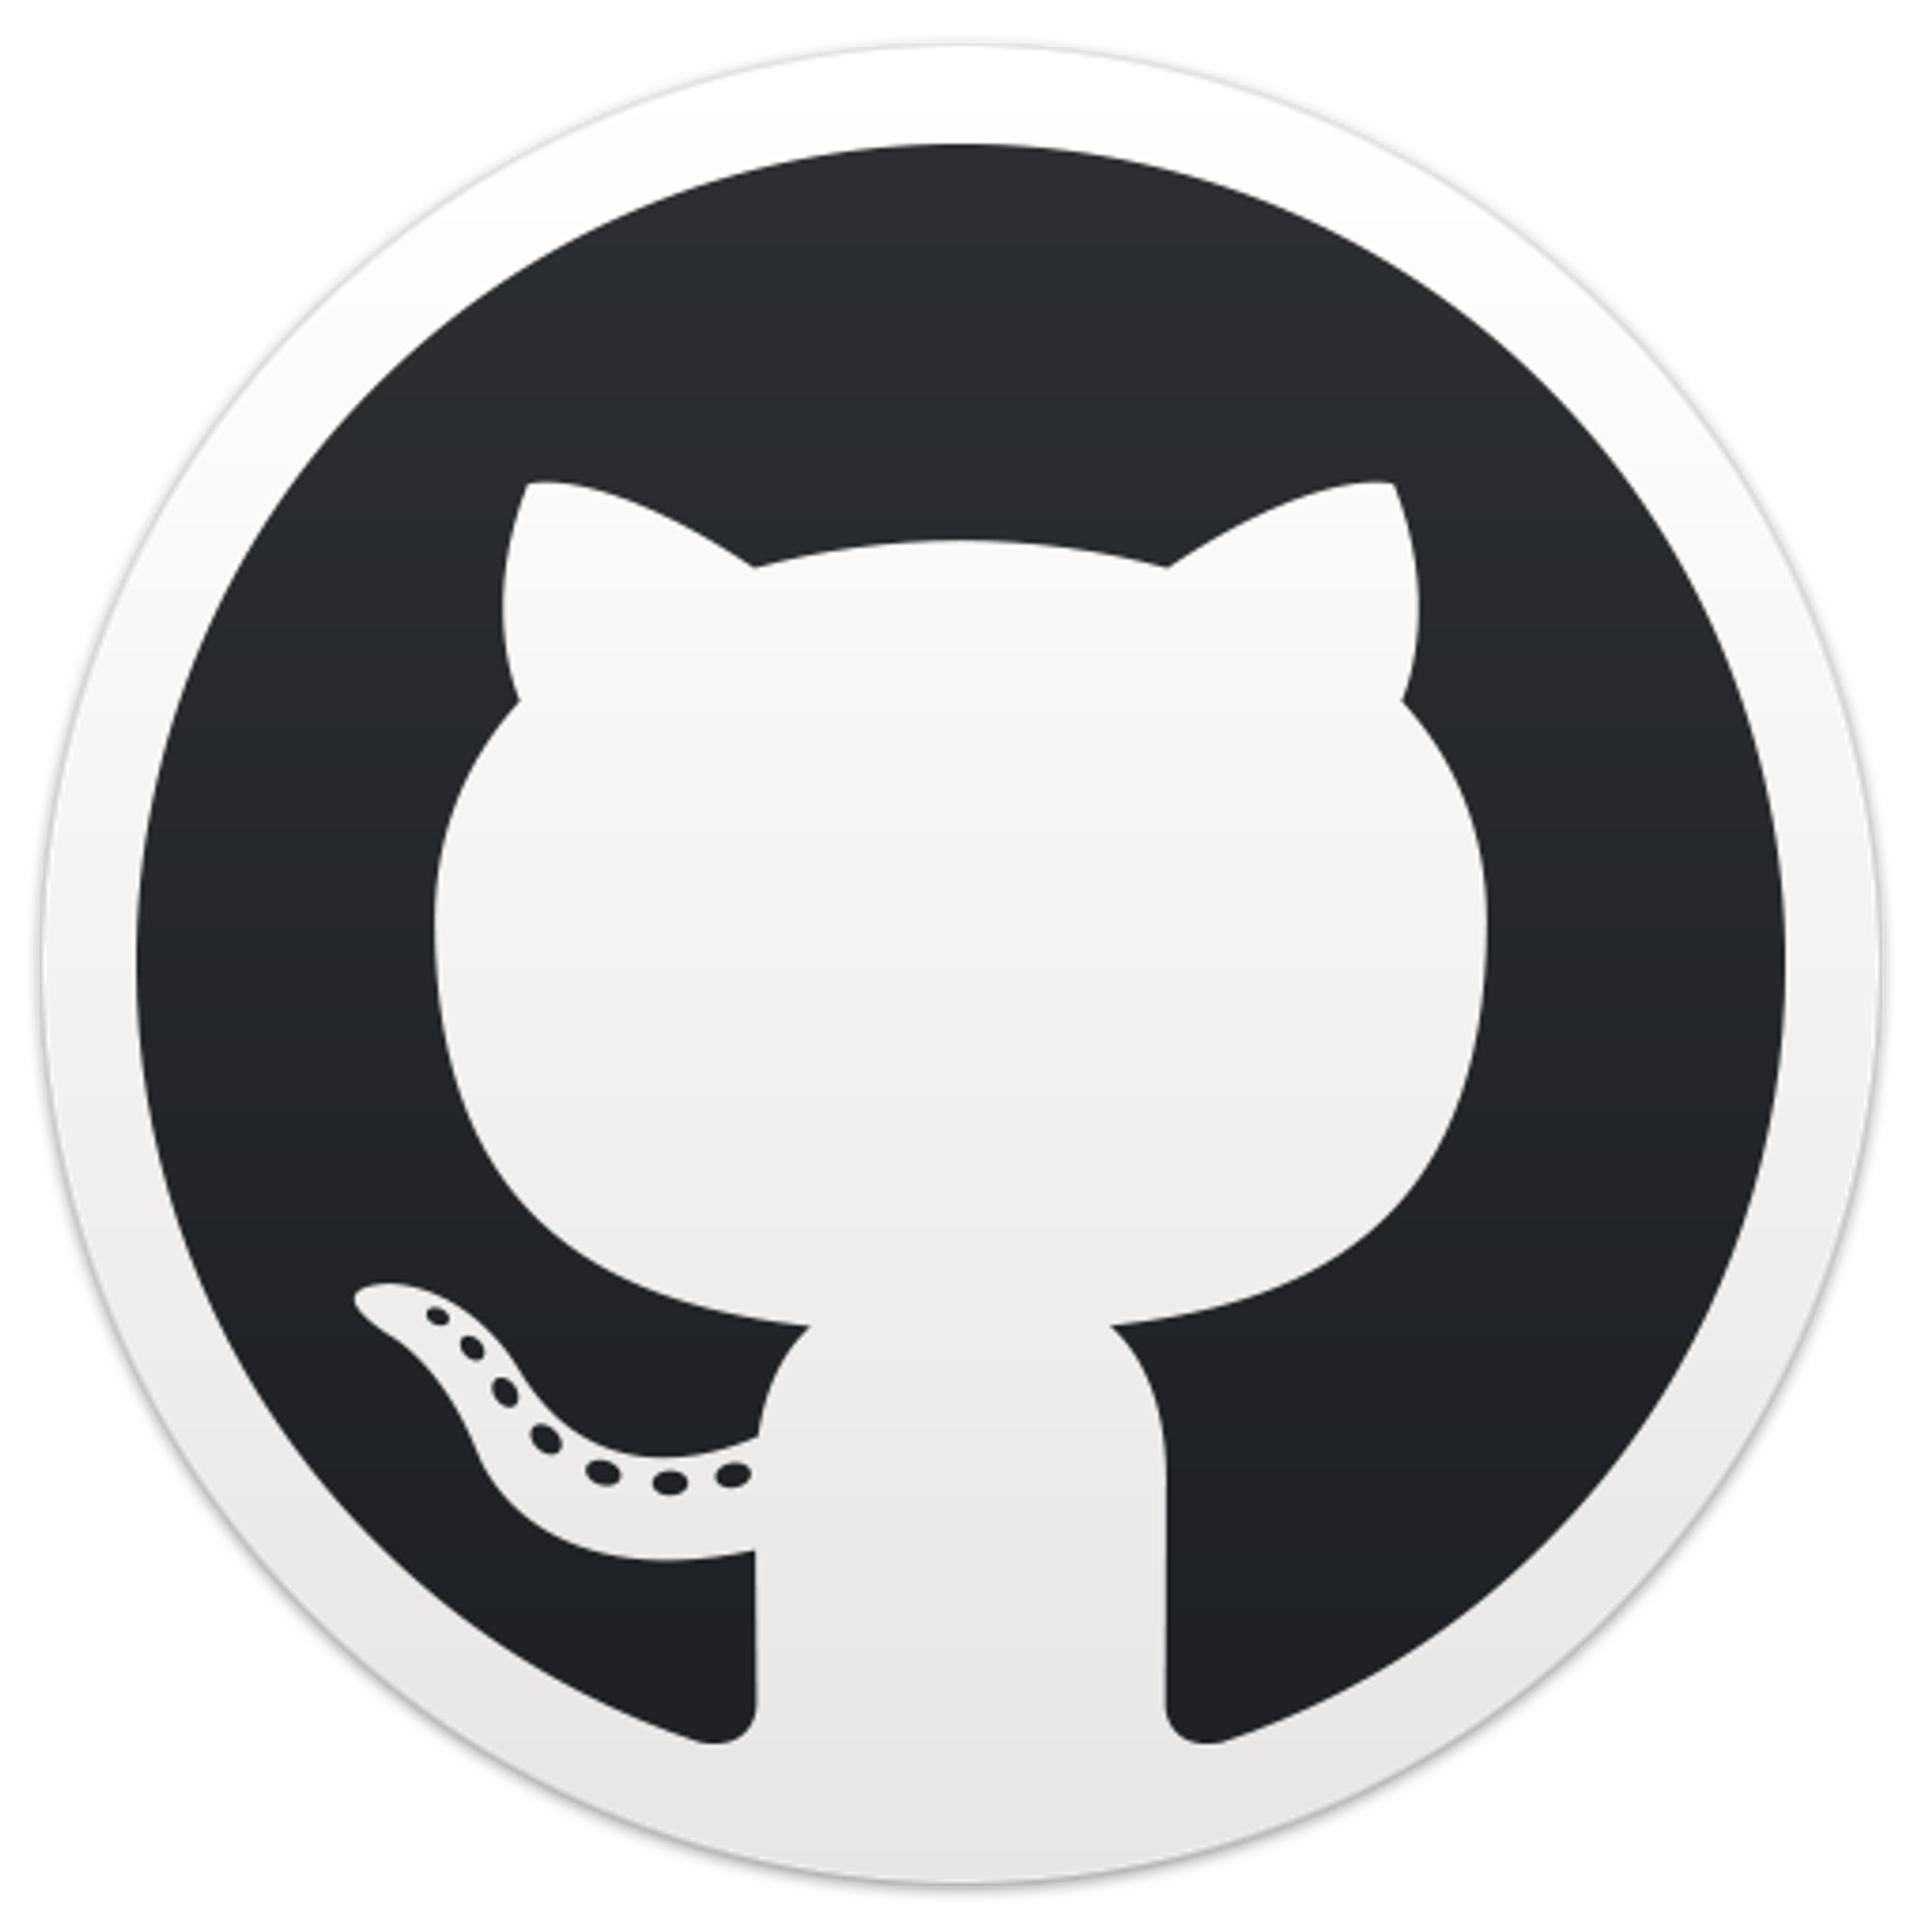 GitHub - dineshshetty/Android-InsecureBankv2: Vulnerable Android application for developers and security enthusiasts to learn about Android insecurities